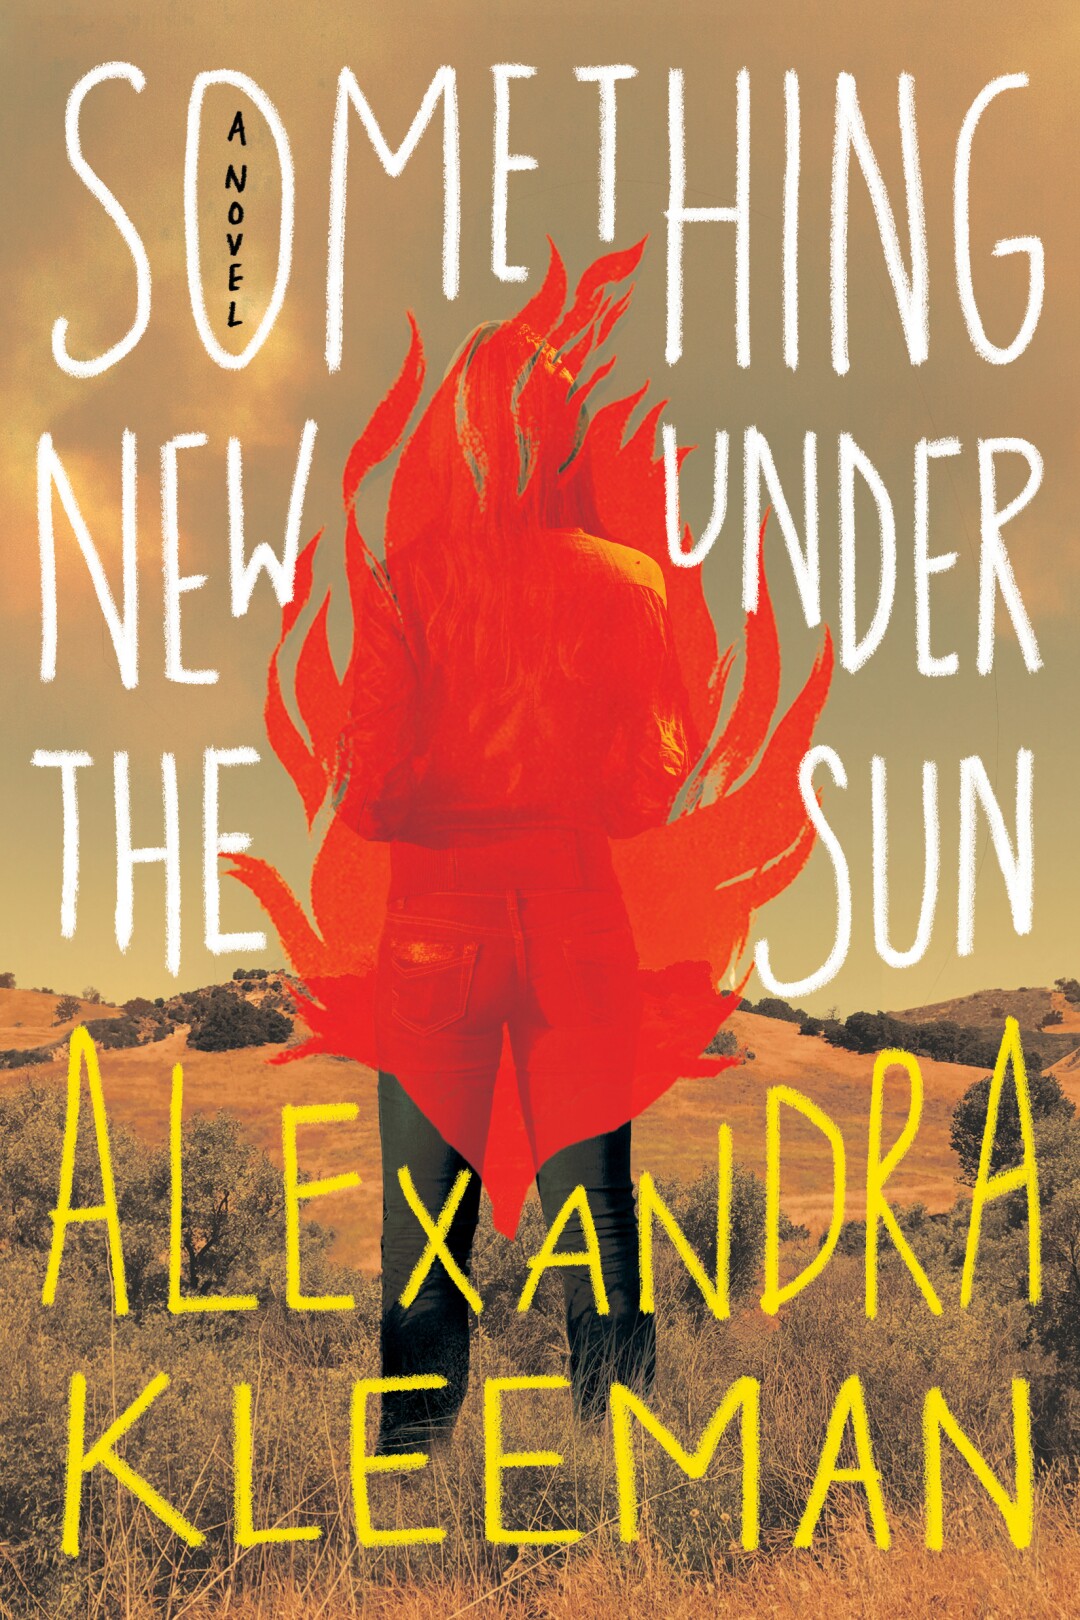 A person on fire in a field on the cover of "Something new under the sun" by Alexandra Kleeman.